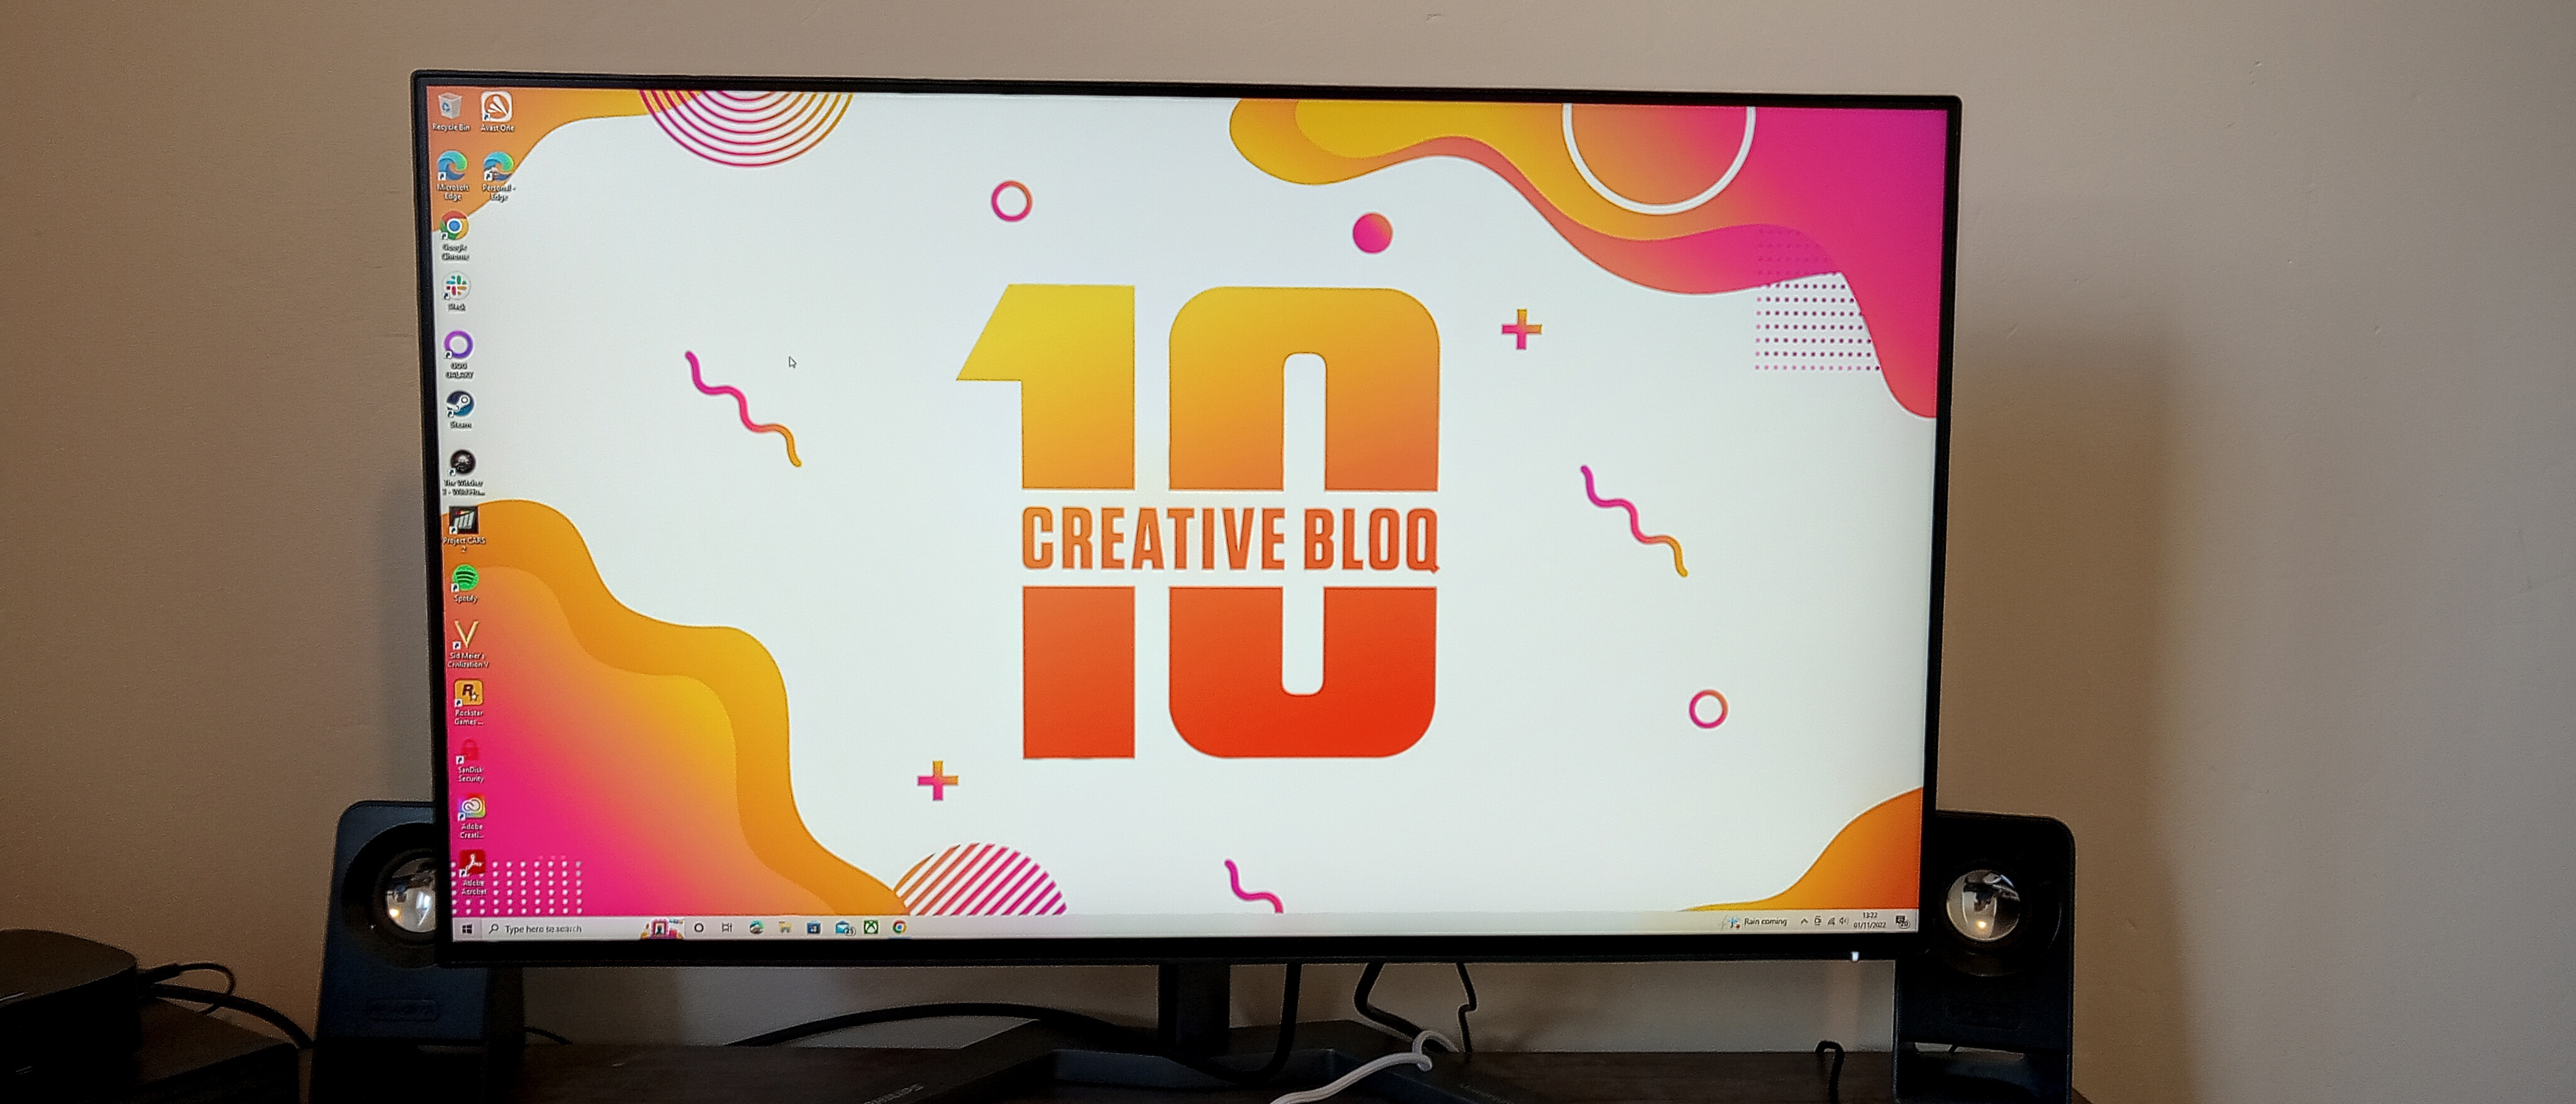 puts Bloq | Philips first review: monitor gaming QHD 27M1F5500P Creative